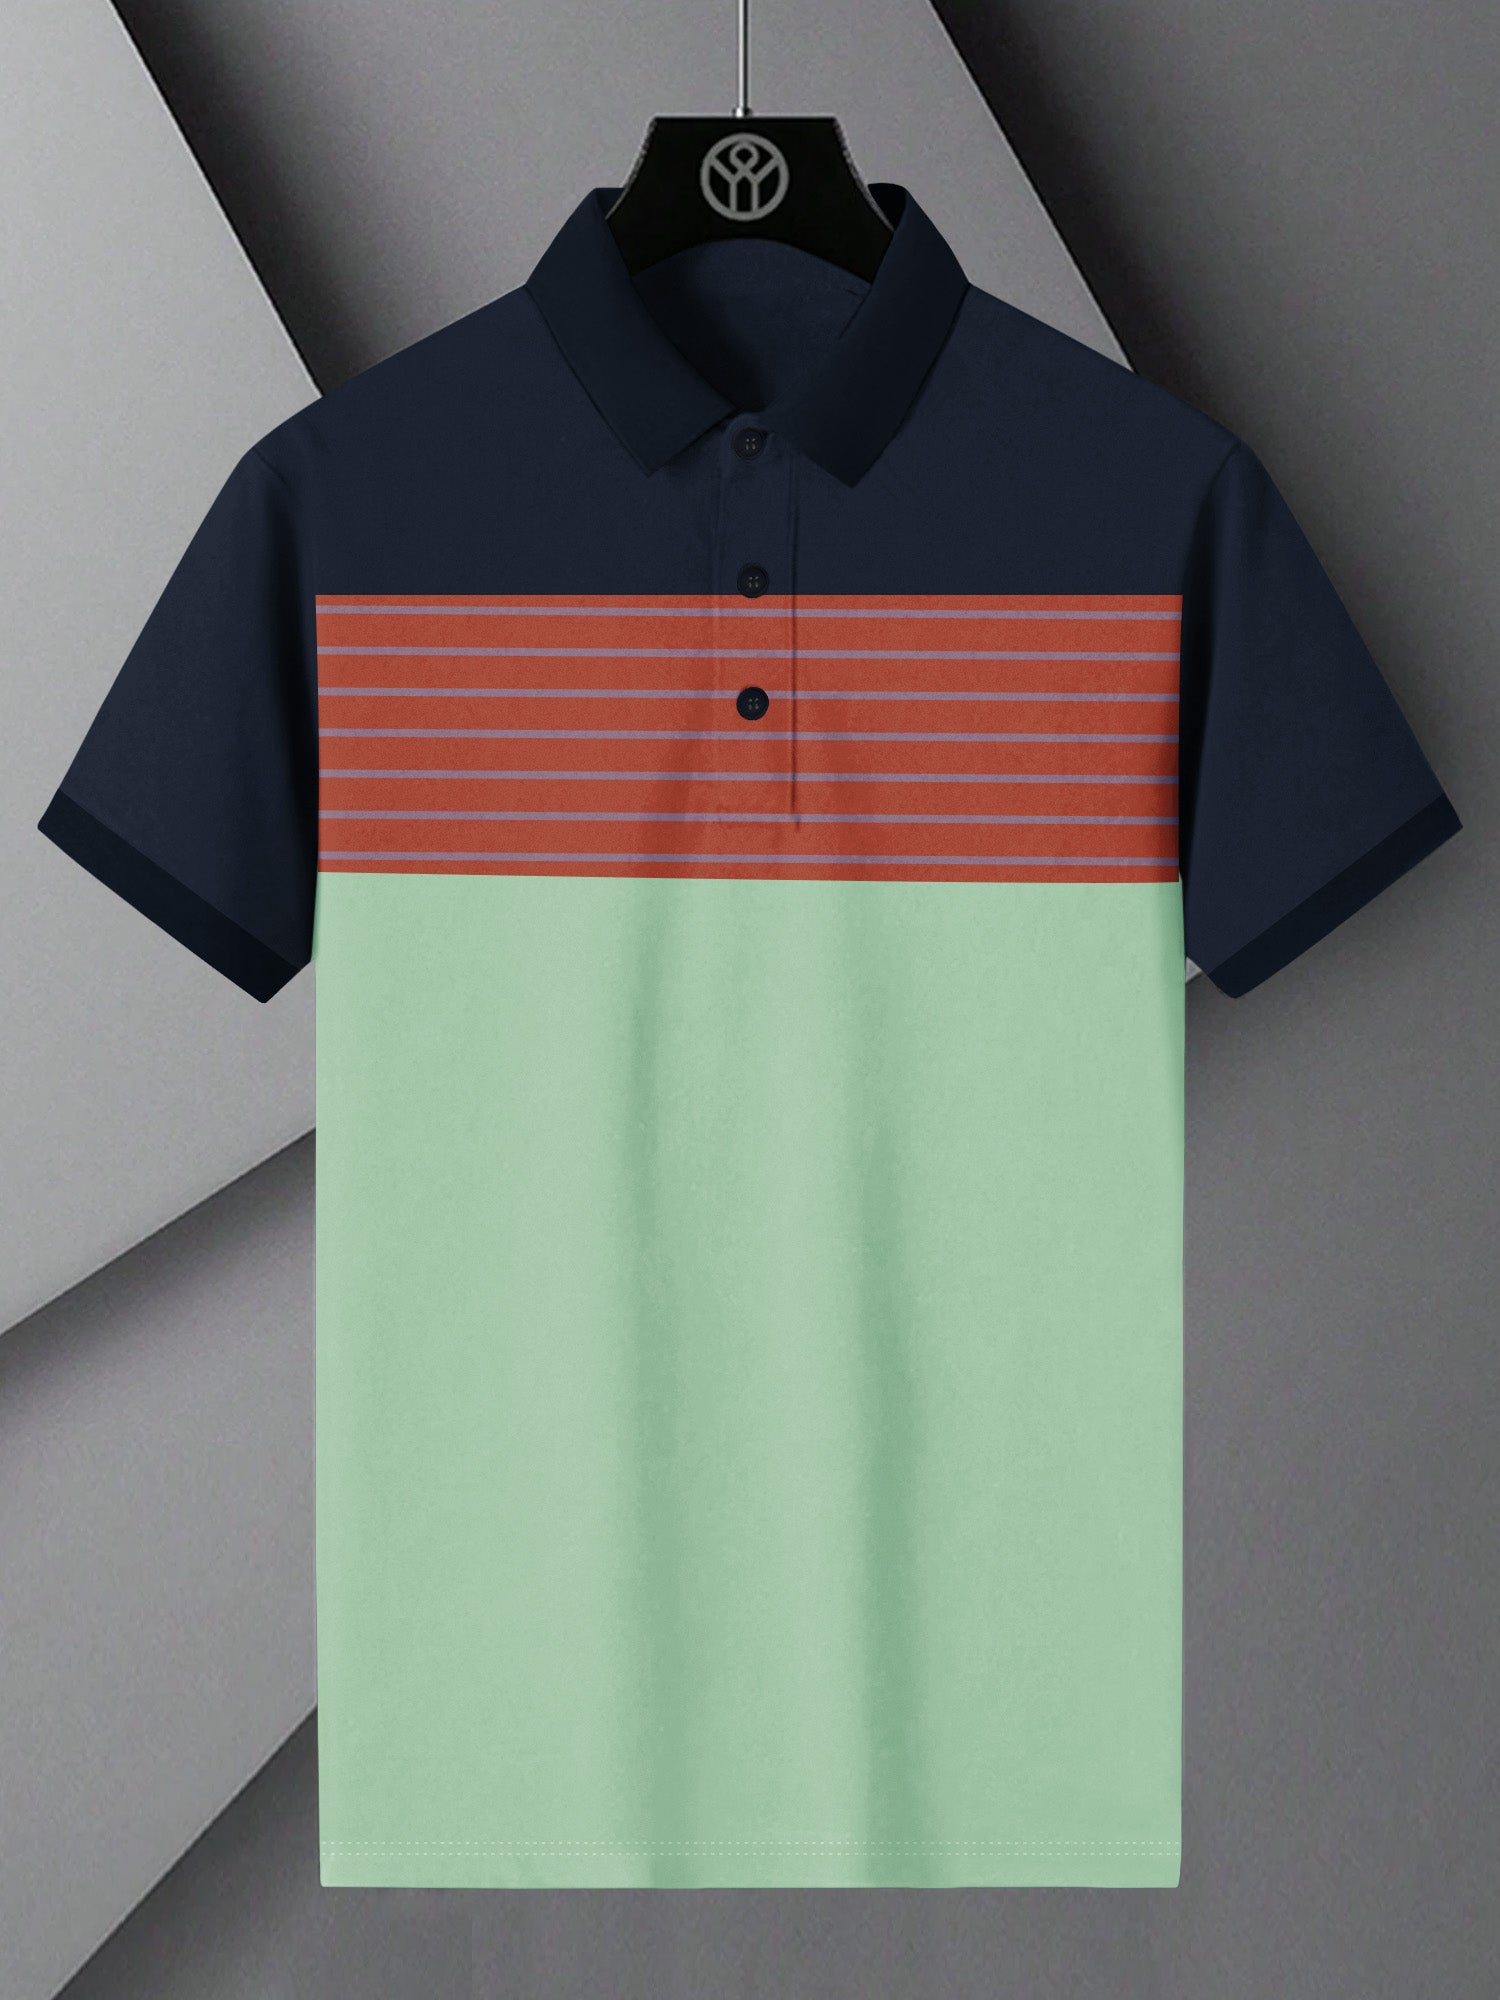 NXT Summer Polo Shirt For Men-Green with Orange & Navy Panel-BE812/BR13053